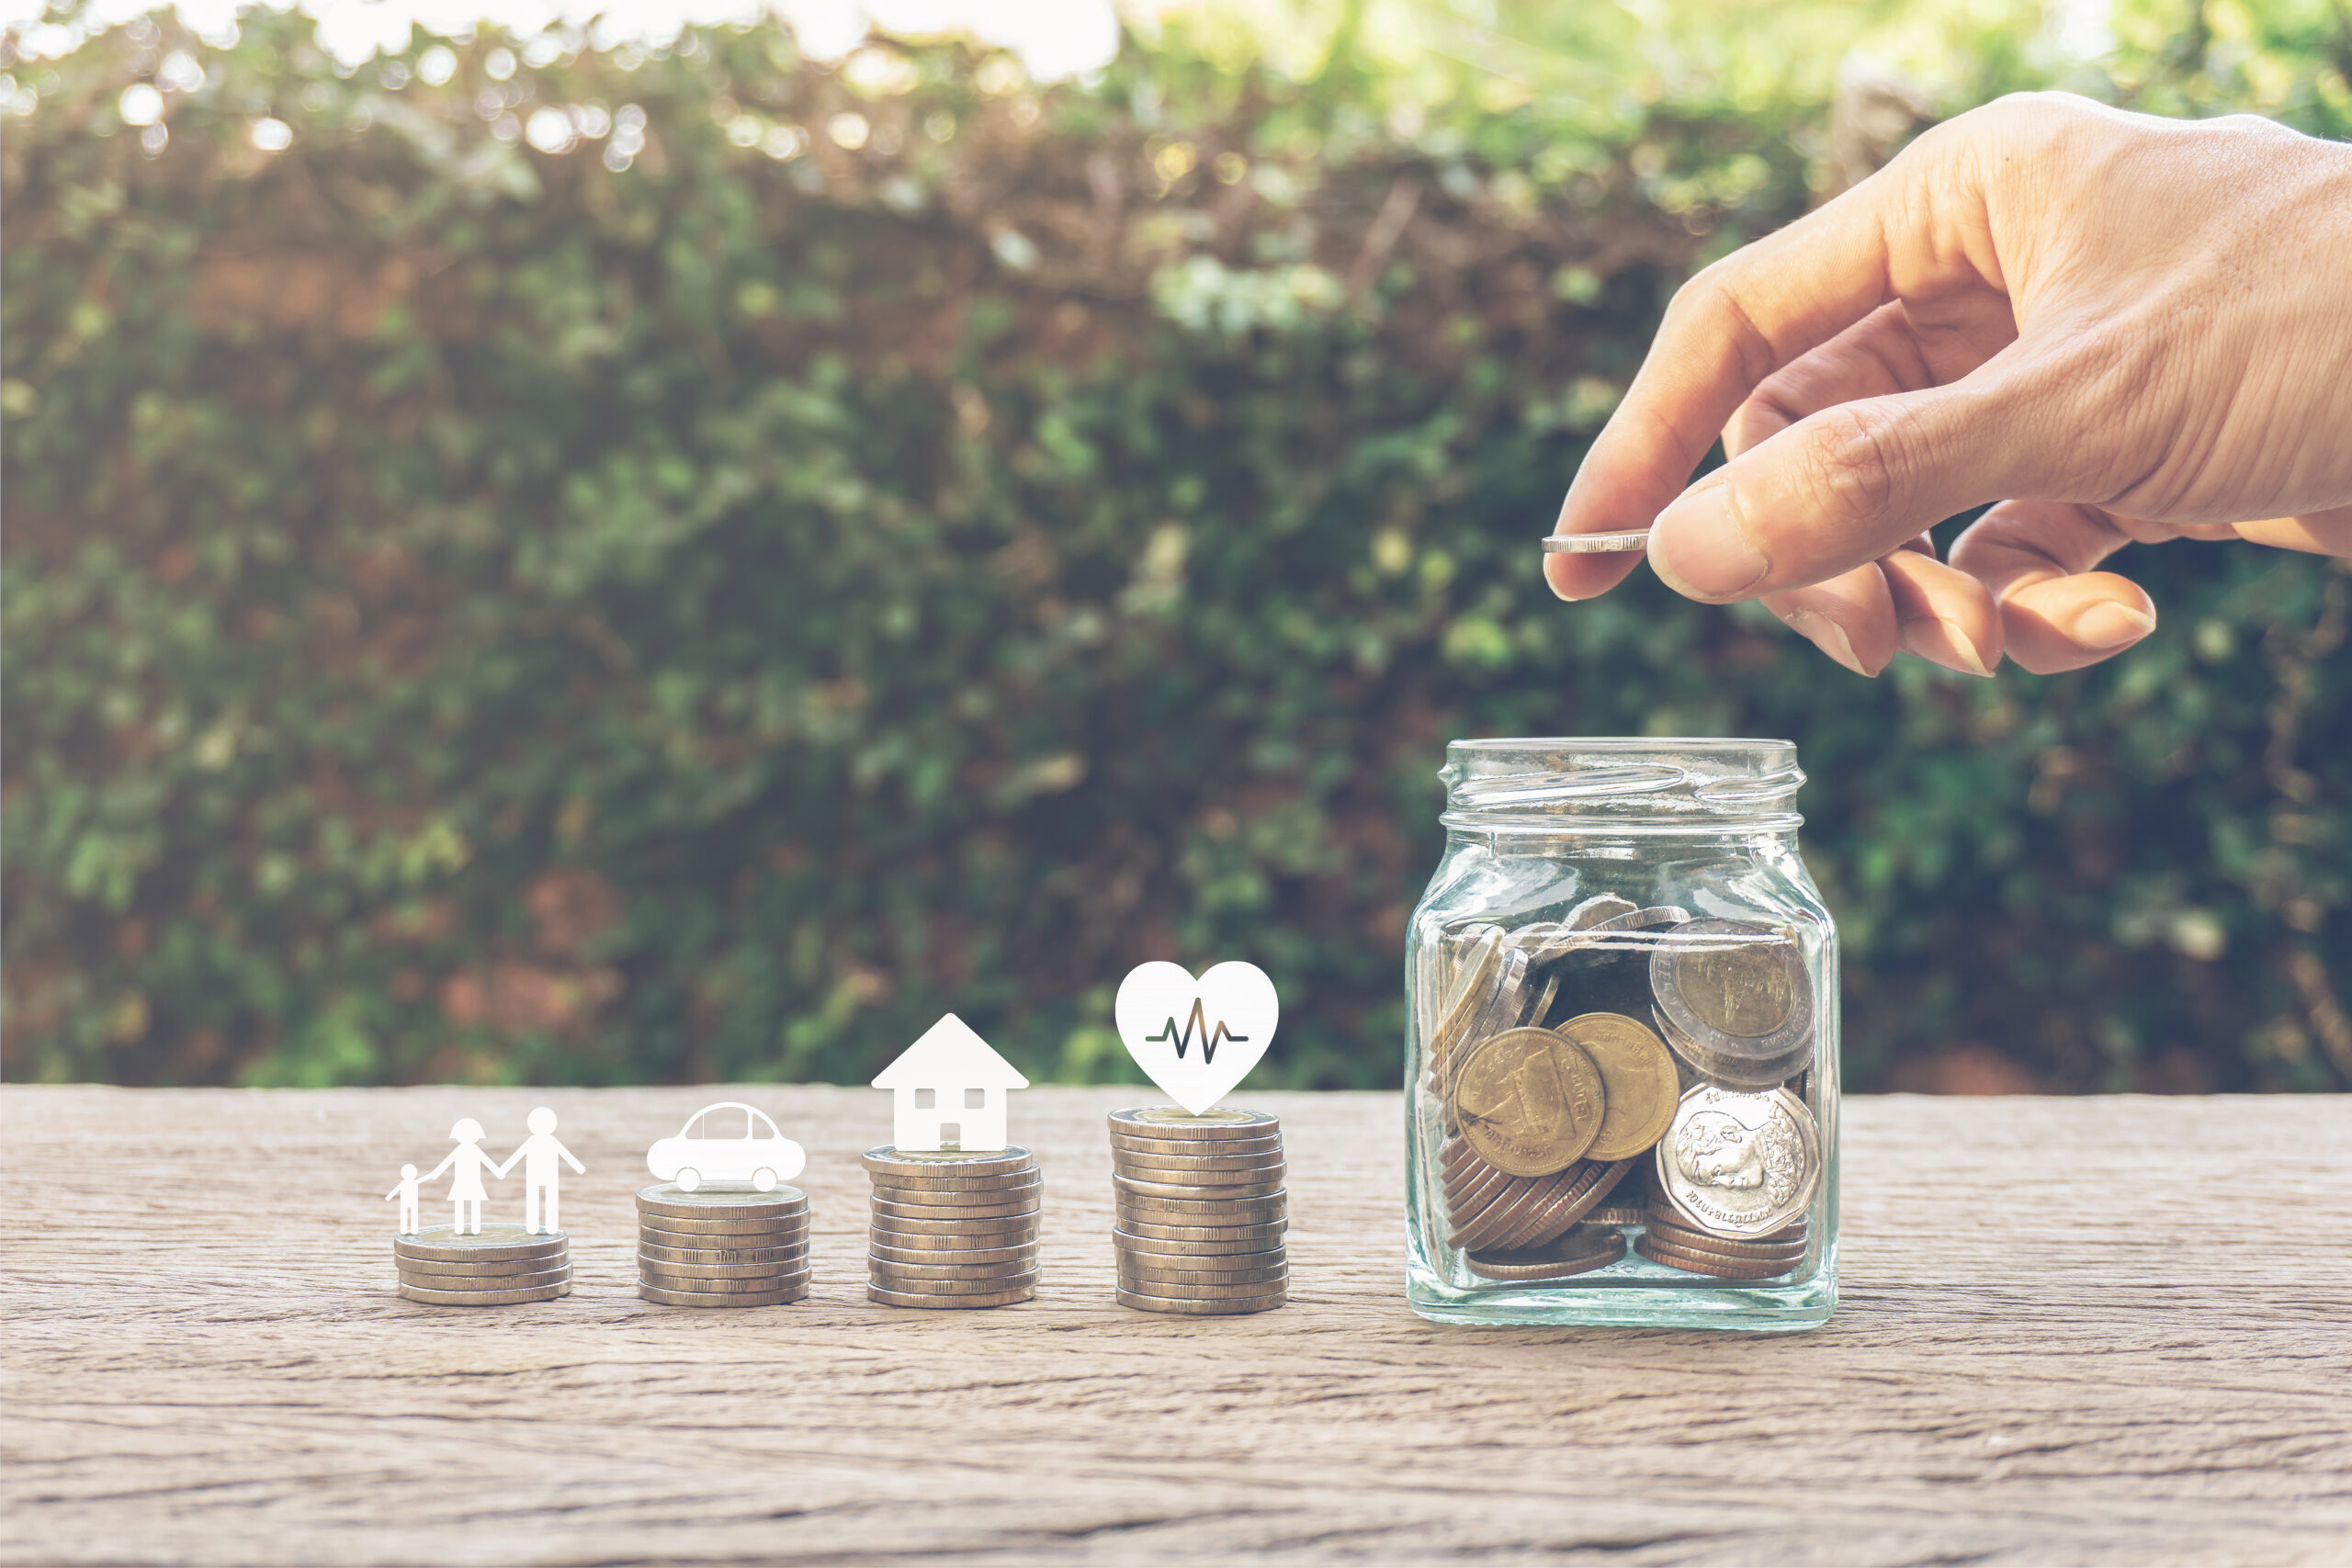 Time Well Spent: 5 Resources for Building Financial Capability